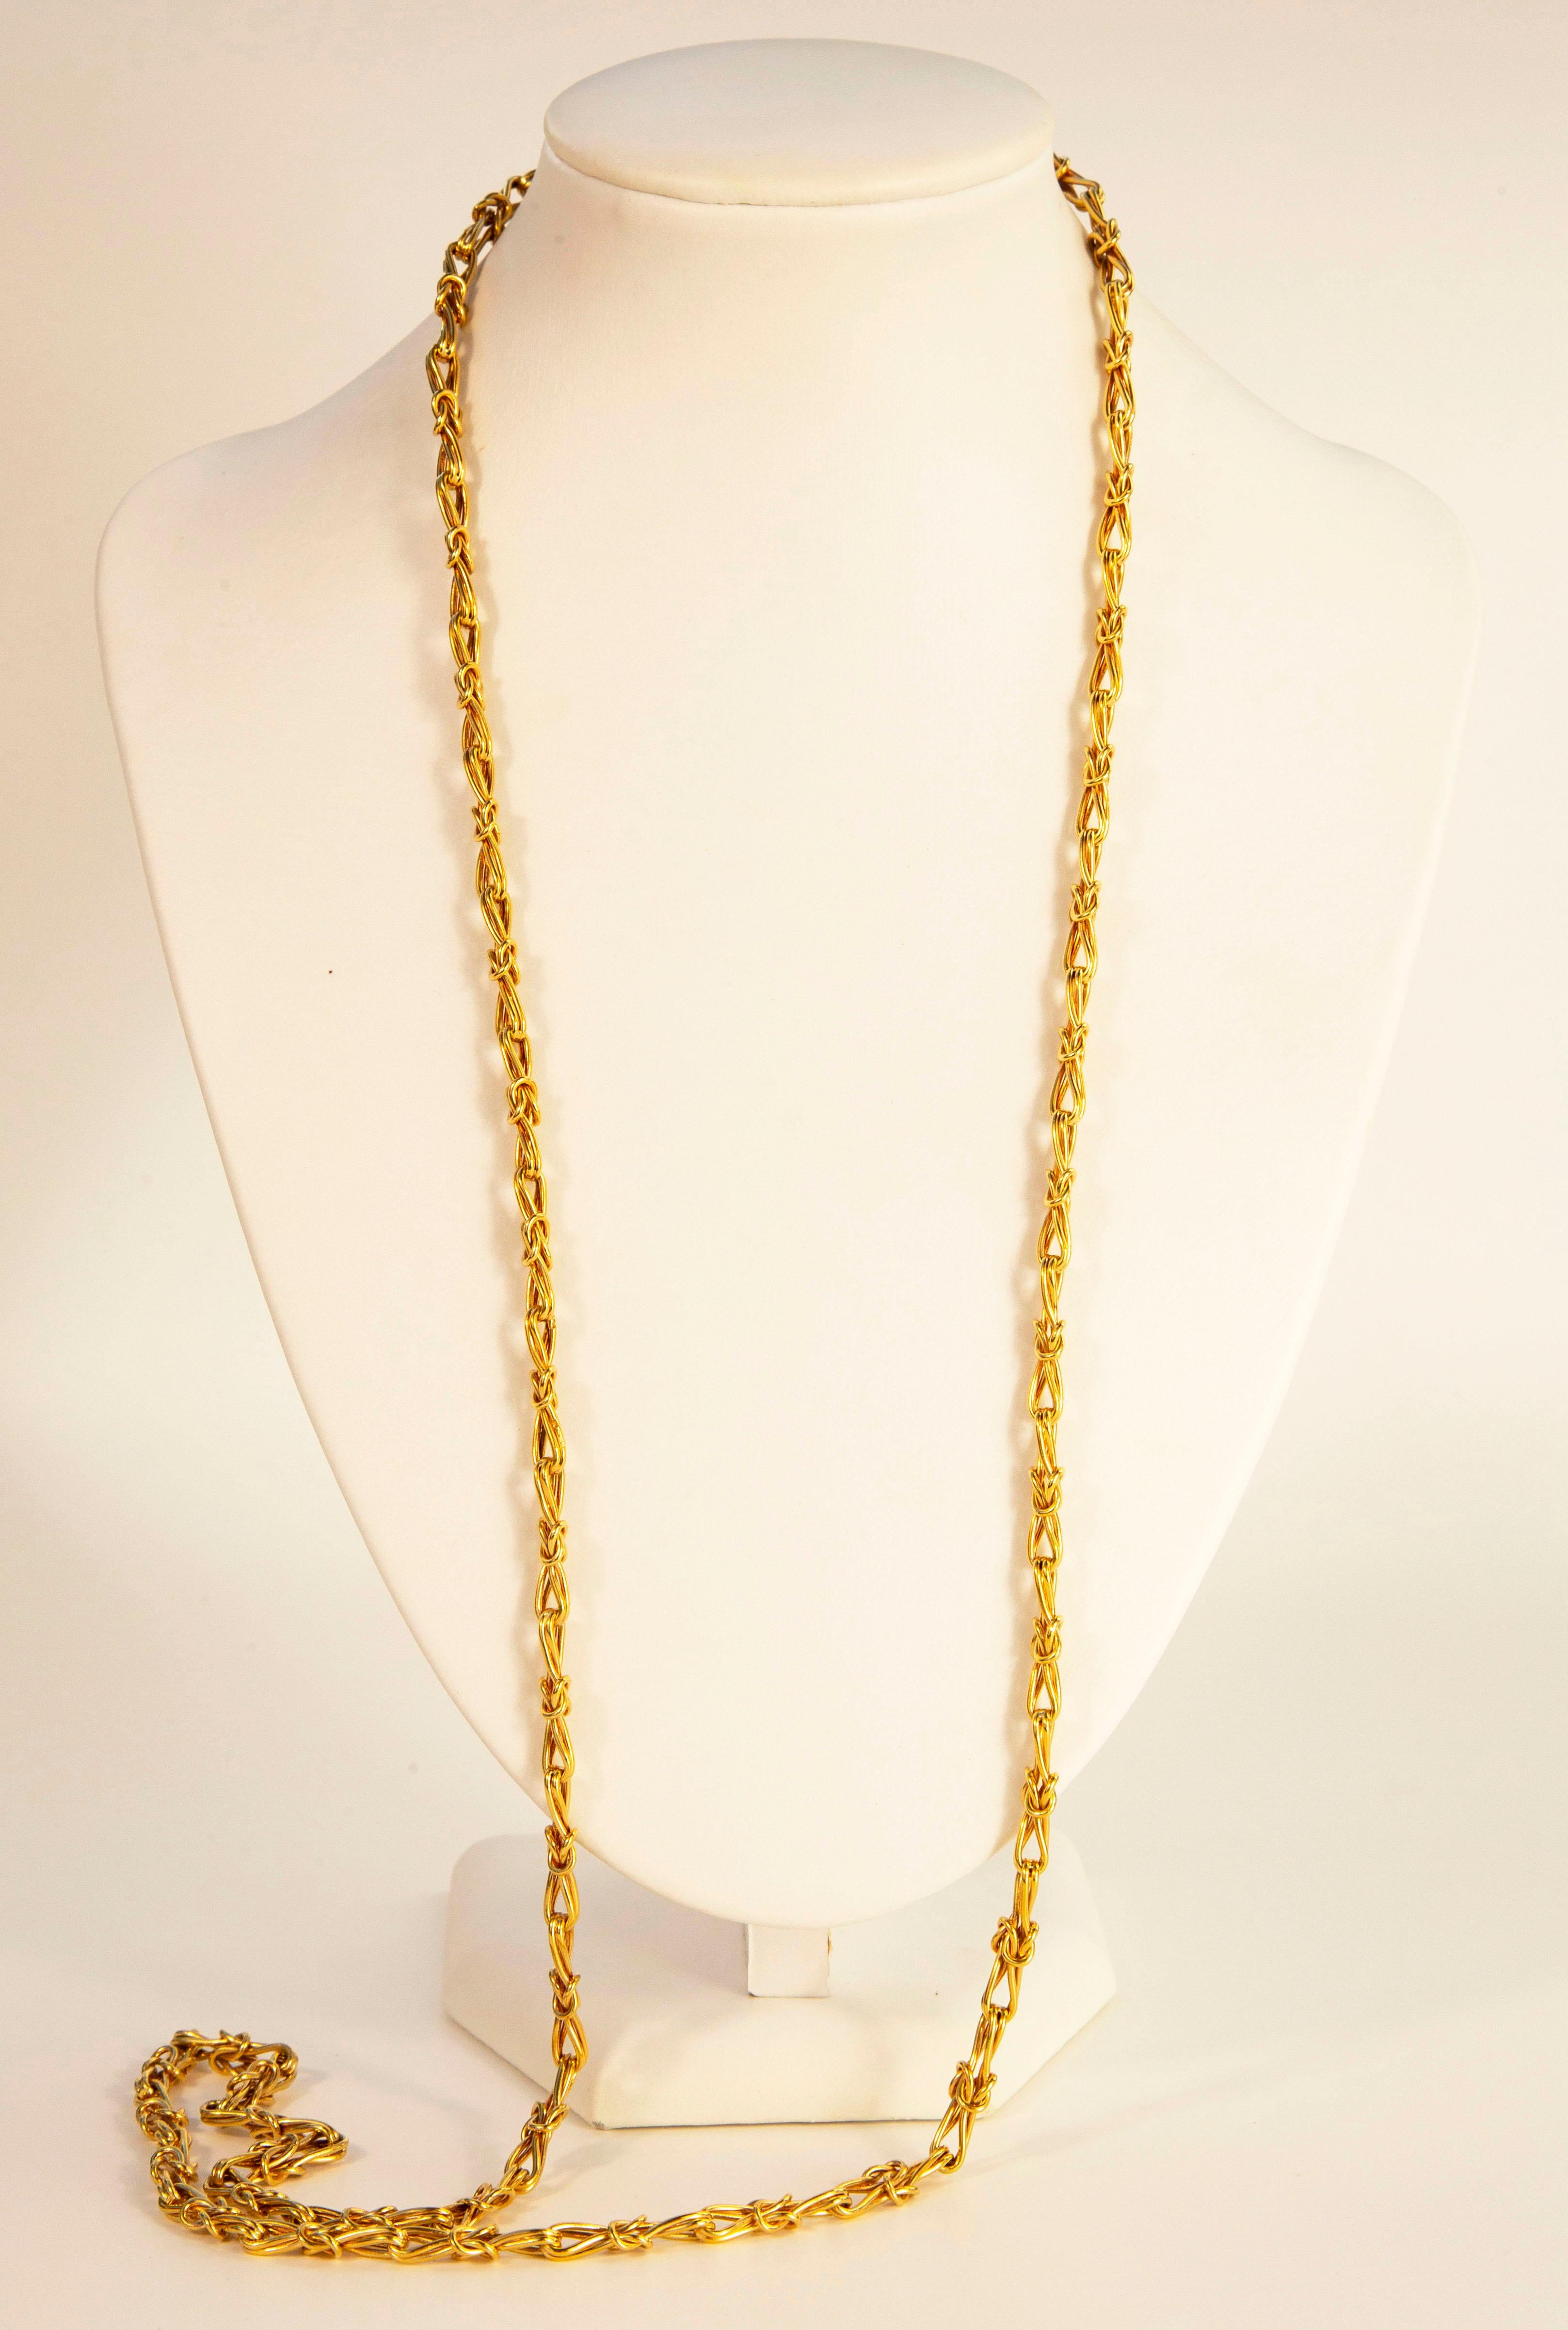 A 14 karat yellow gold fantasy link necklace, with stylized buttons loop motifs.  The necklace was manufactured in the late 20th century in the Netherlands. 
The necklace does not have a closure, but due to its imposing length  of 94 centimeters, it